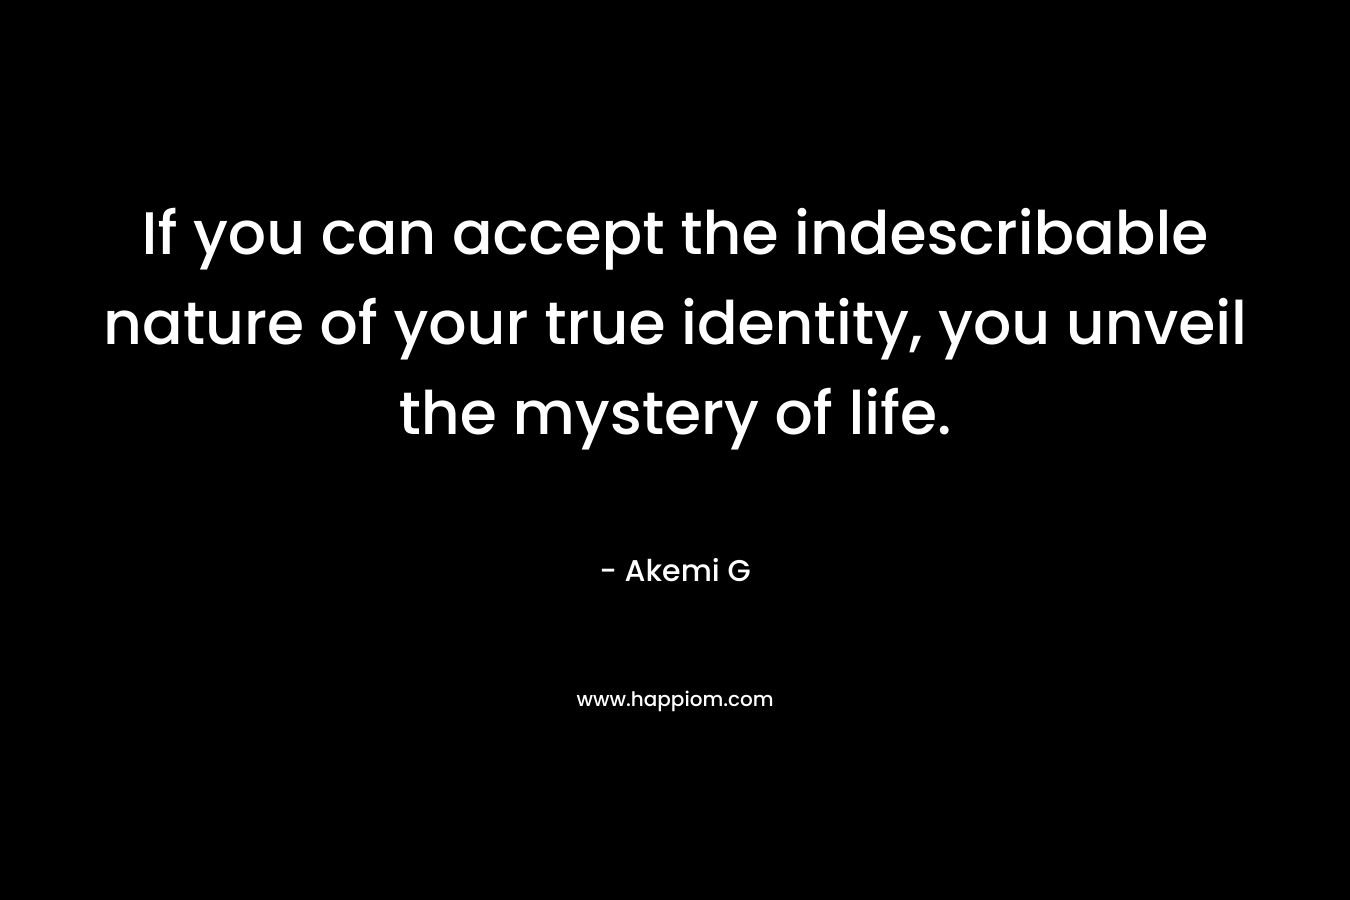 If you can accept the indescribable nature of your true identity, you unveil the mystery of life. – Akemi G